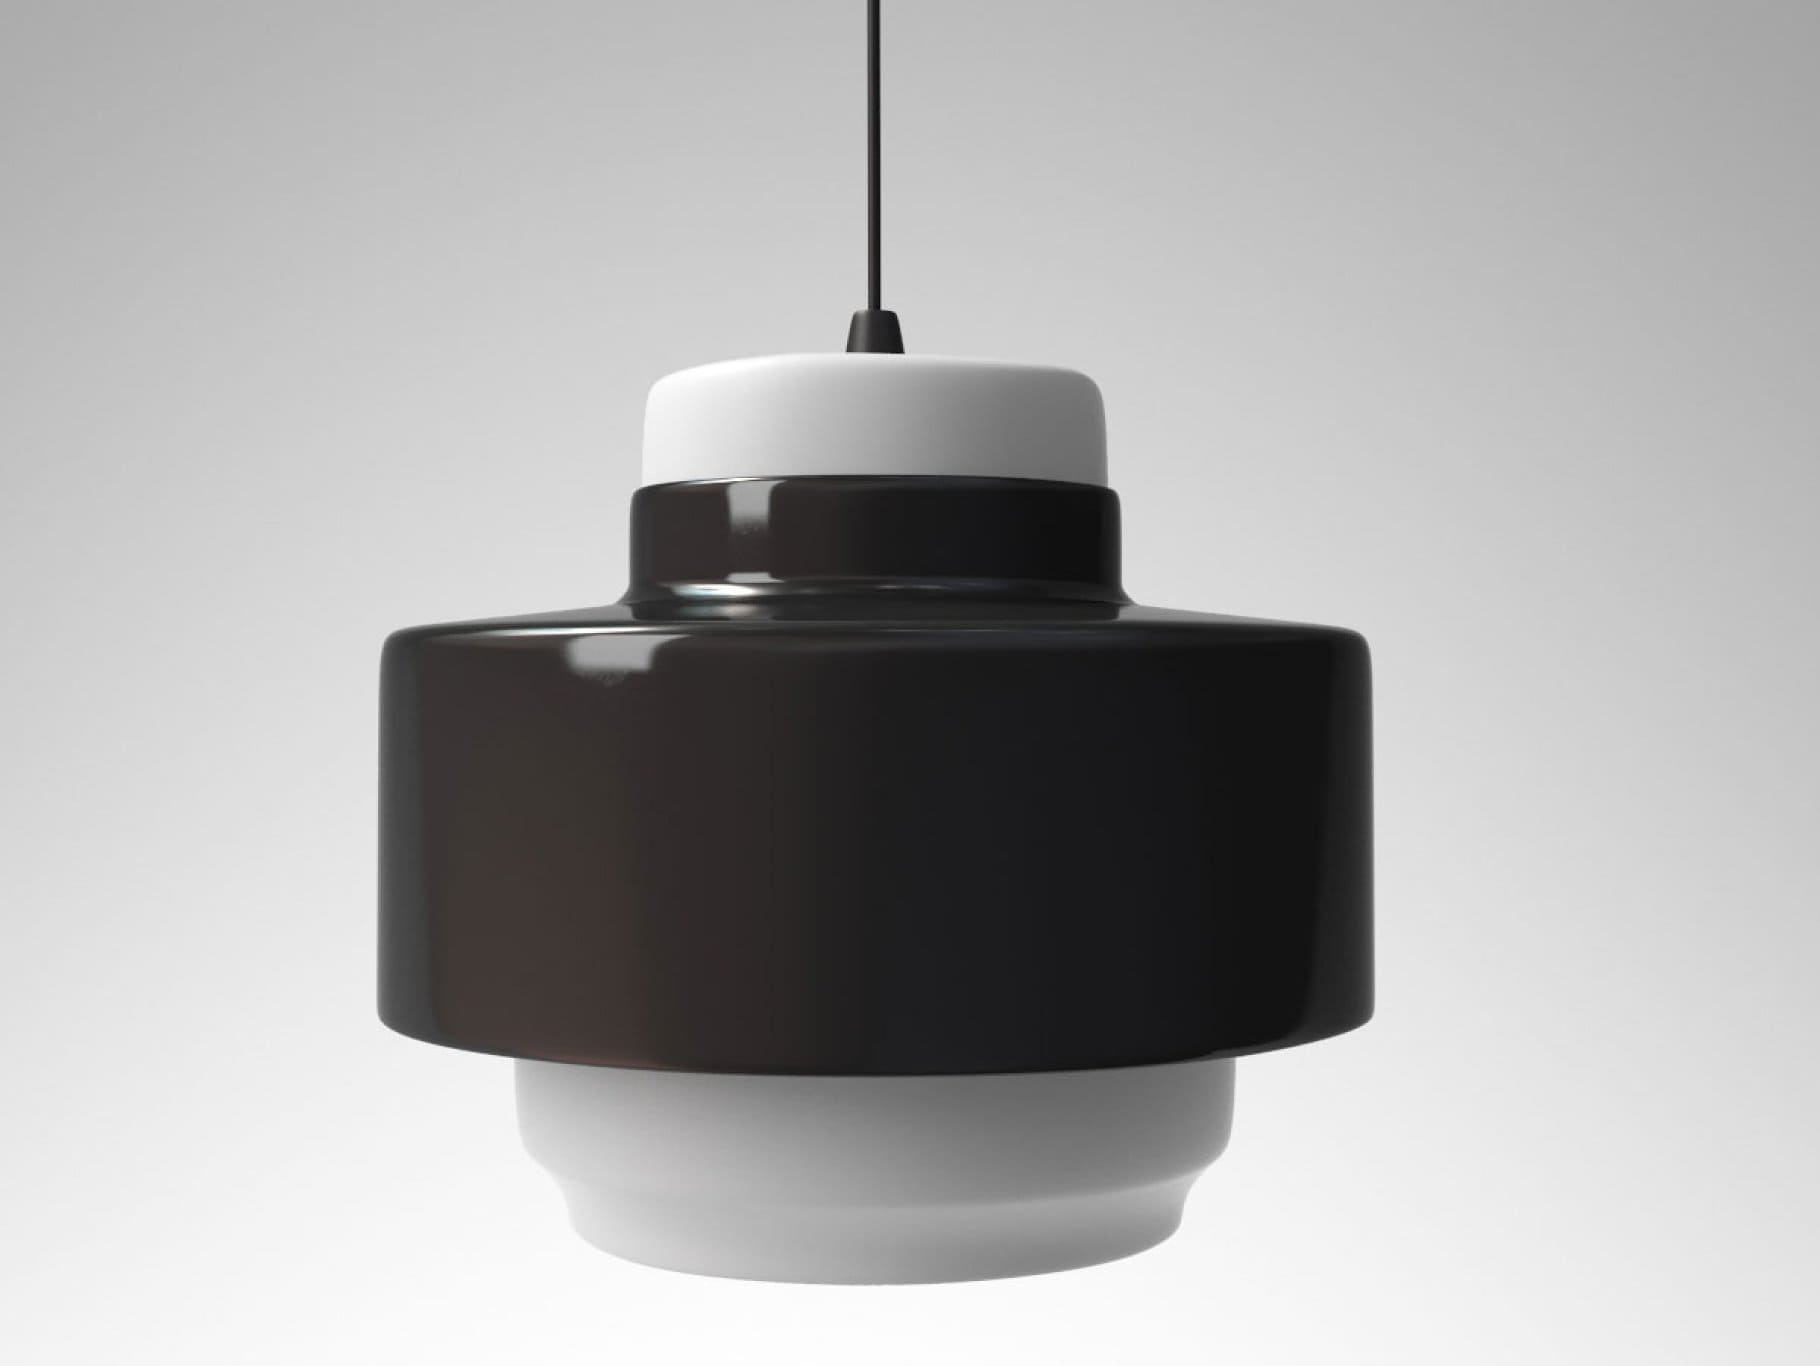 Black and white Lento lamp on a white background.